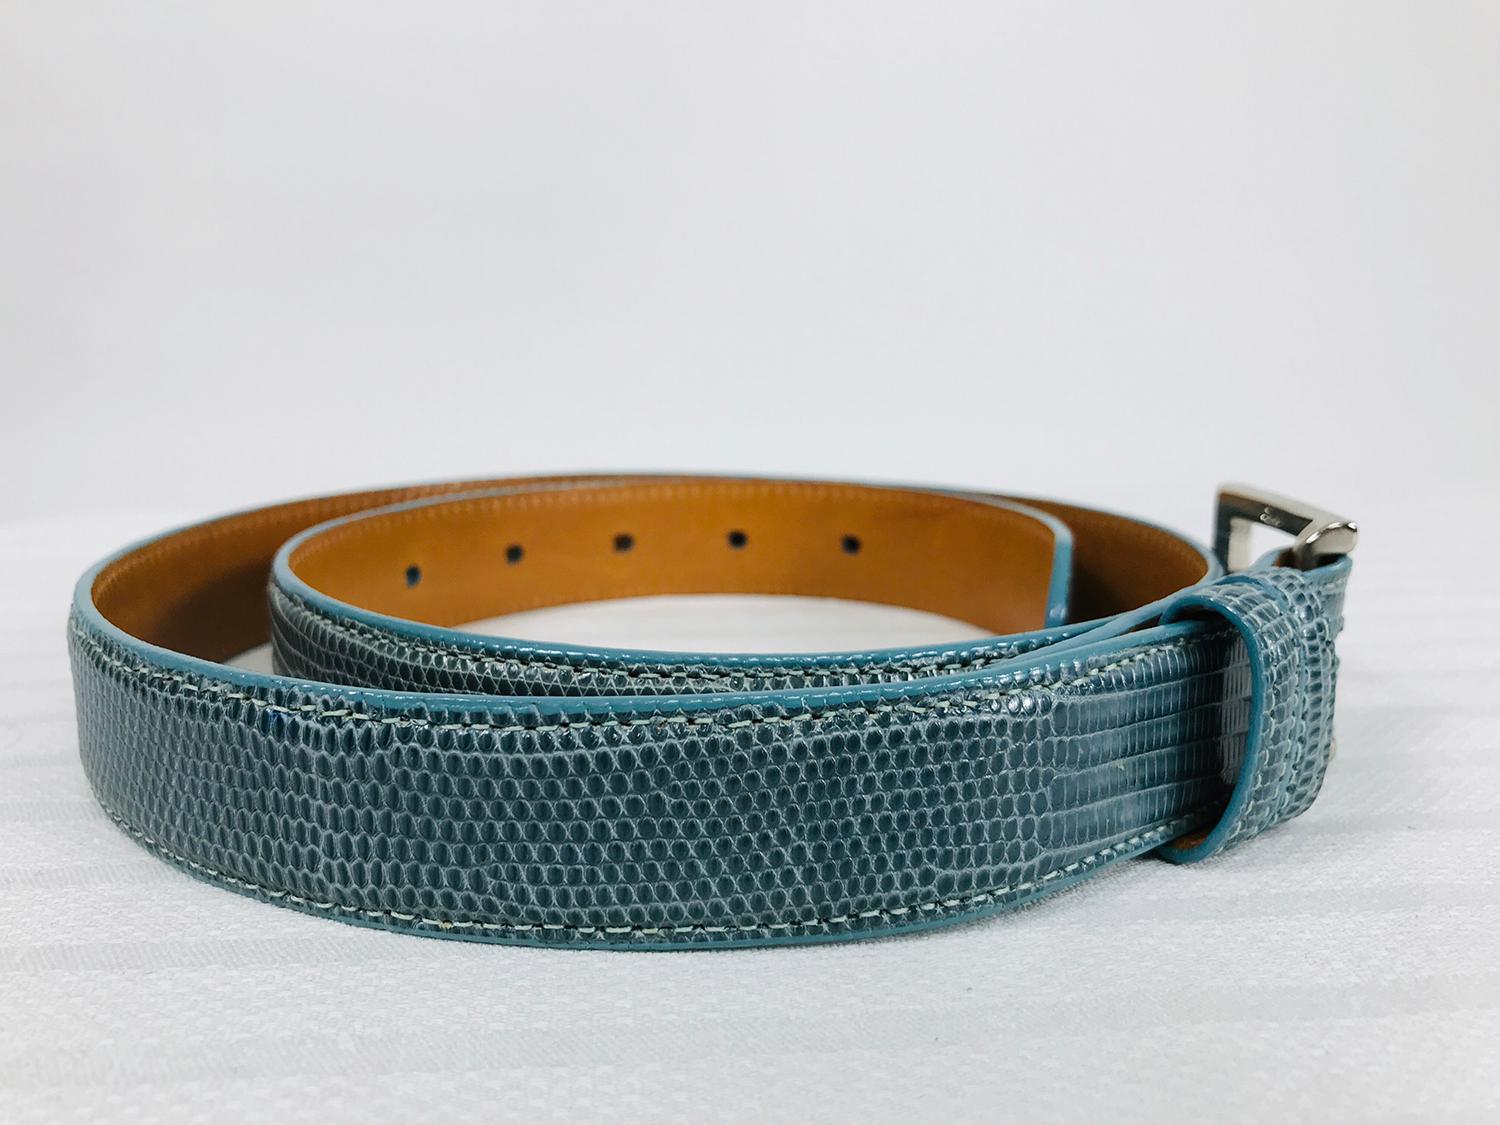 Lai blue lizard belt with silver blue enamel and silver metal buckle, lined in tan leather, marked size medium. In very good pre owned condition.
Measurements are in inches:
Buckle 1 1/4 x 1 1/4
Belt strap only 36 1/2
Belt width 1